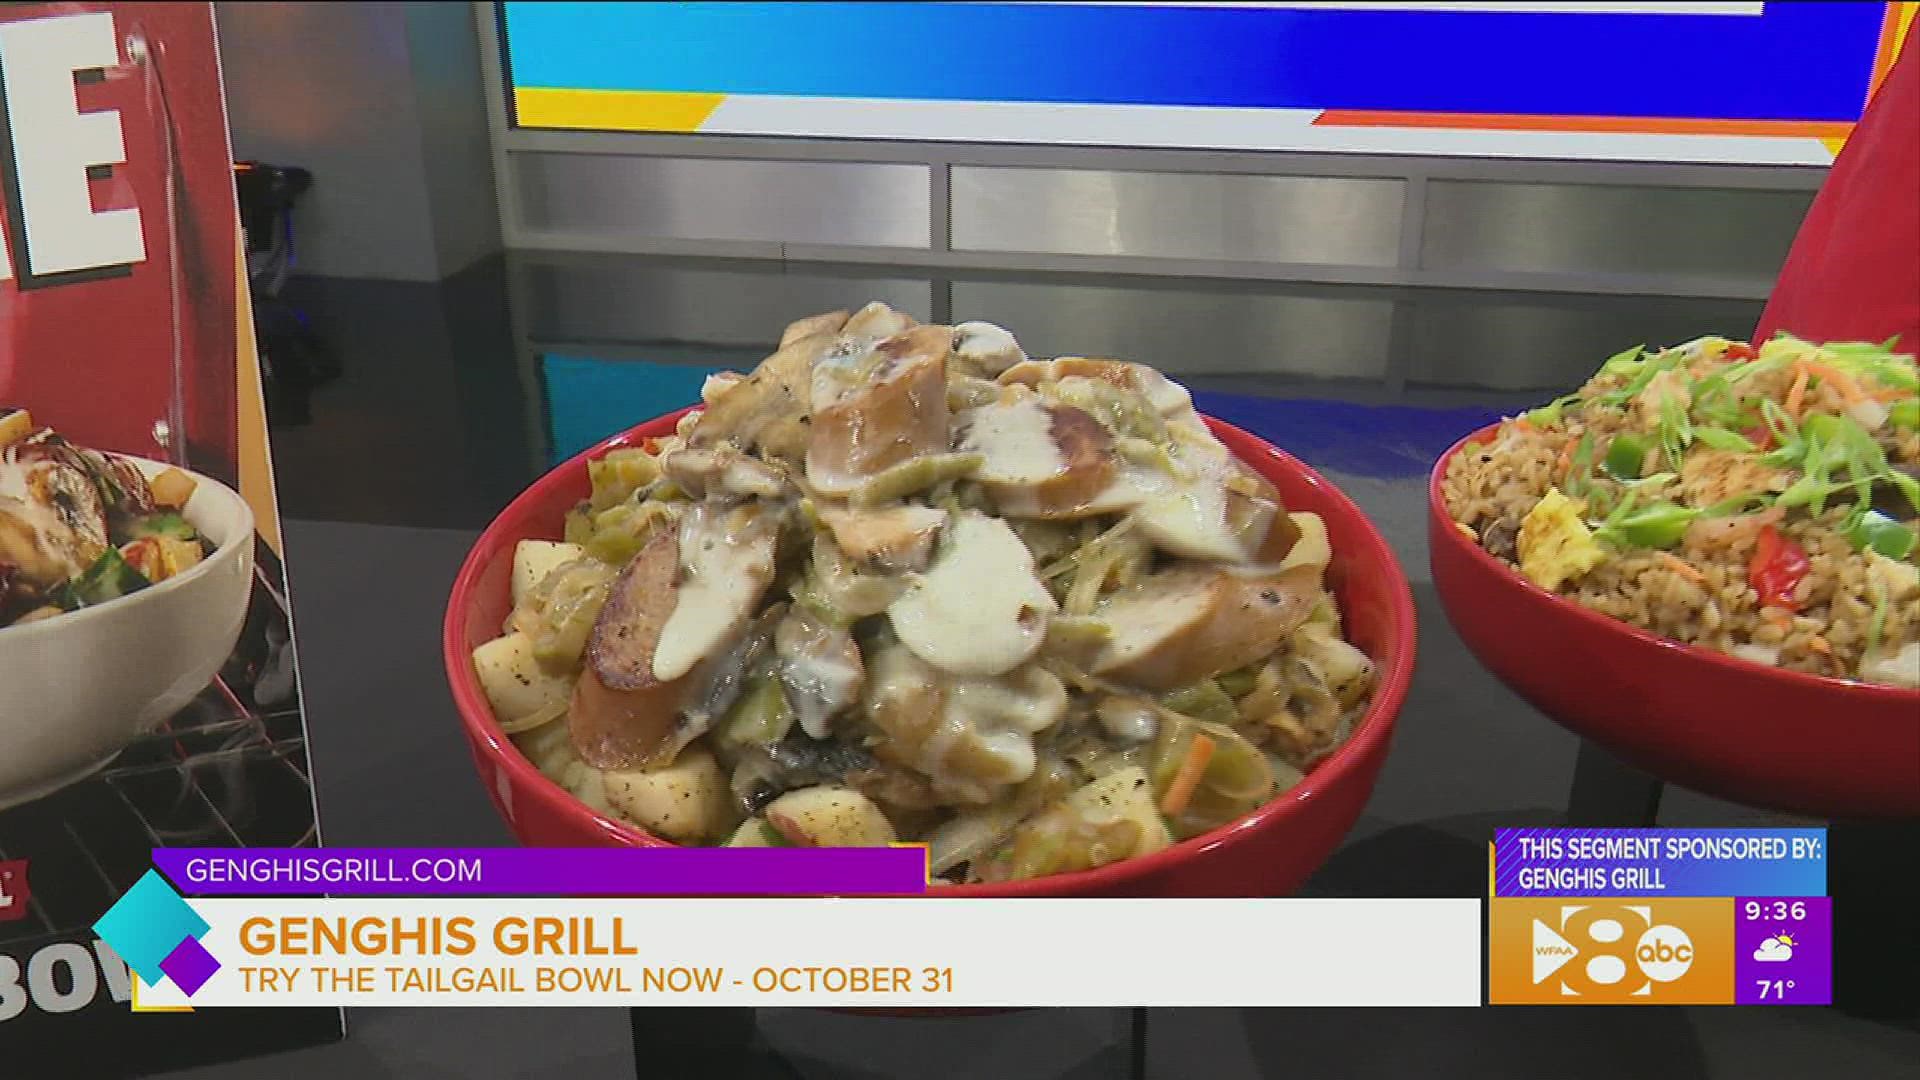 This segment is sponsored by Genghis Grill.